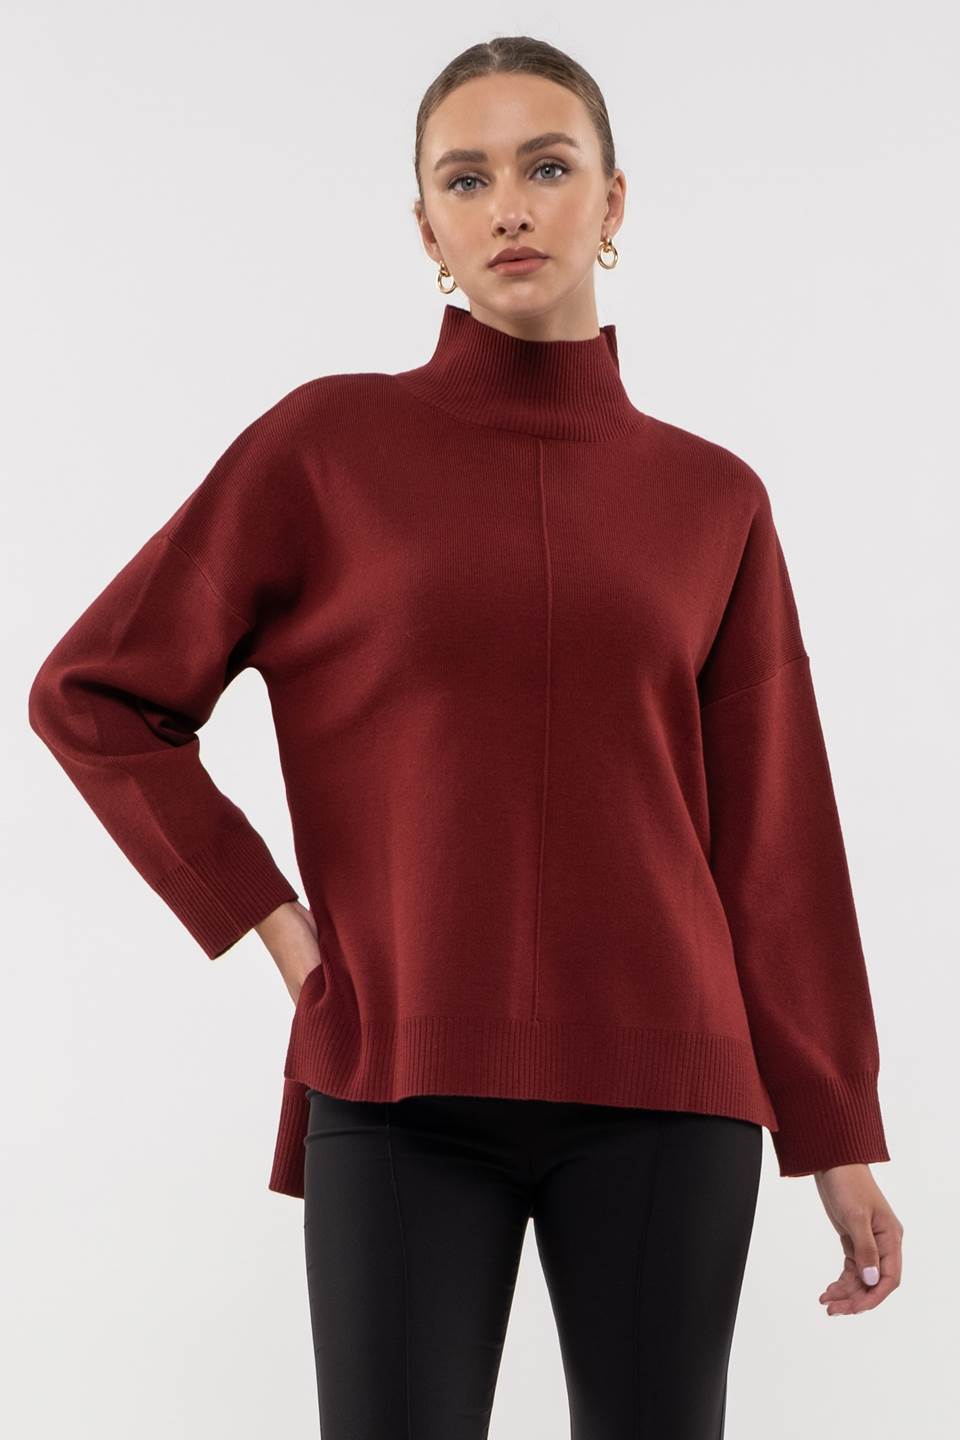 TW1061 Solid Mock Neck Knit Sweater